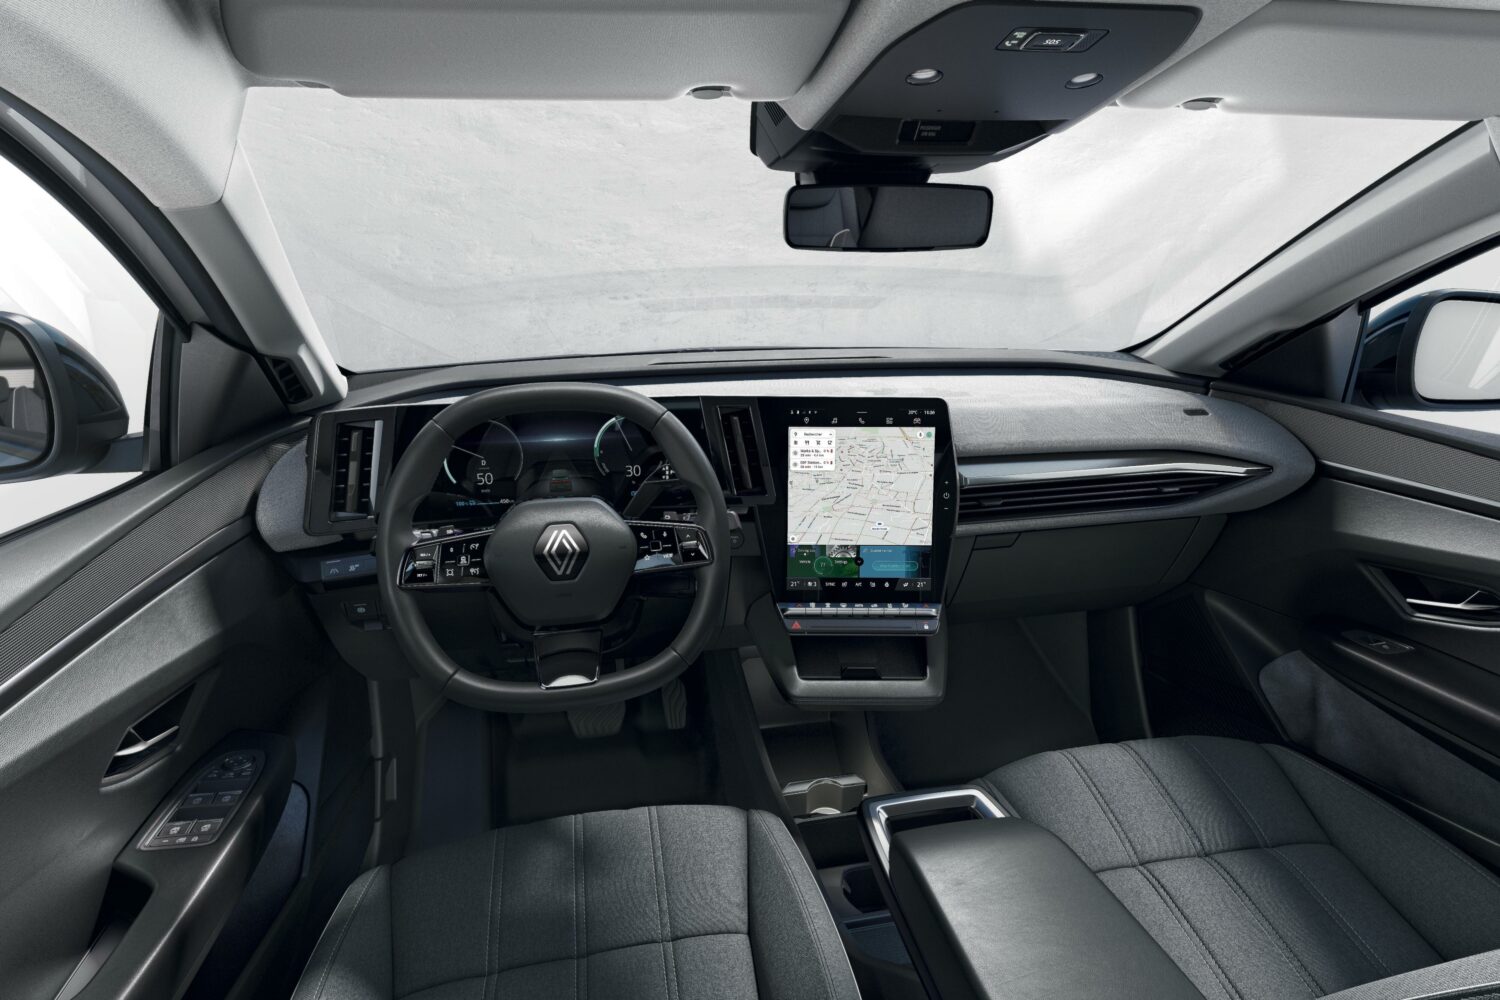 2022 - Story Renault - OpenR: touchscreens and tech blend